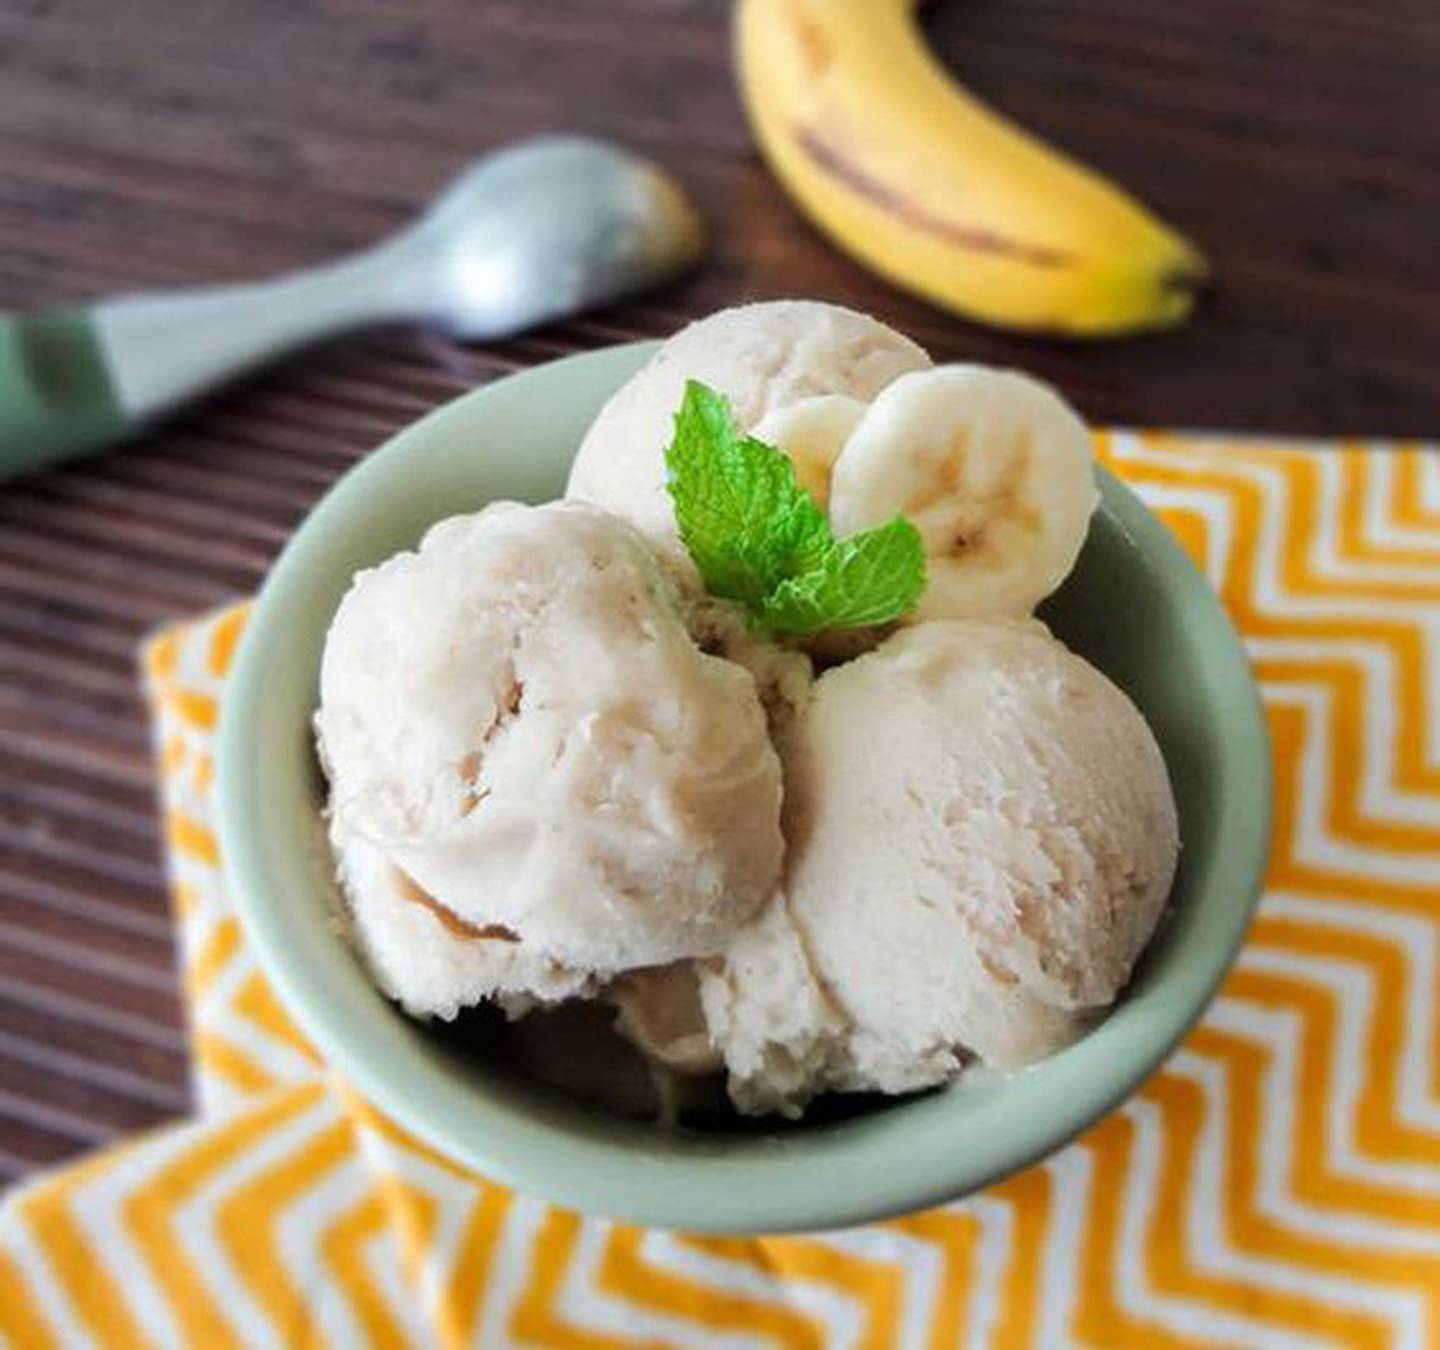 Easy and delicious ice cream recipes that you can make at home to enjoy the weekend 5